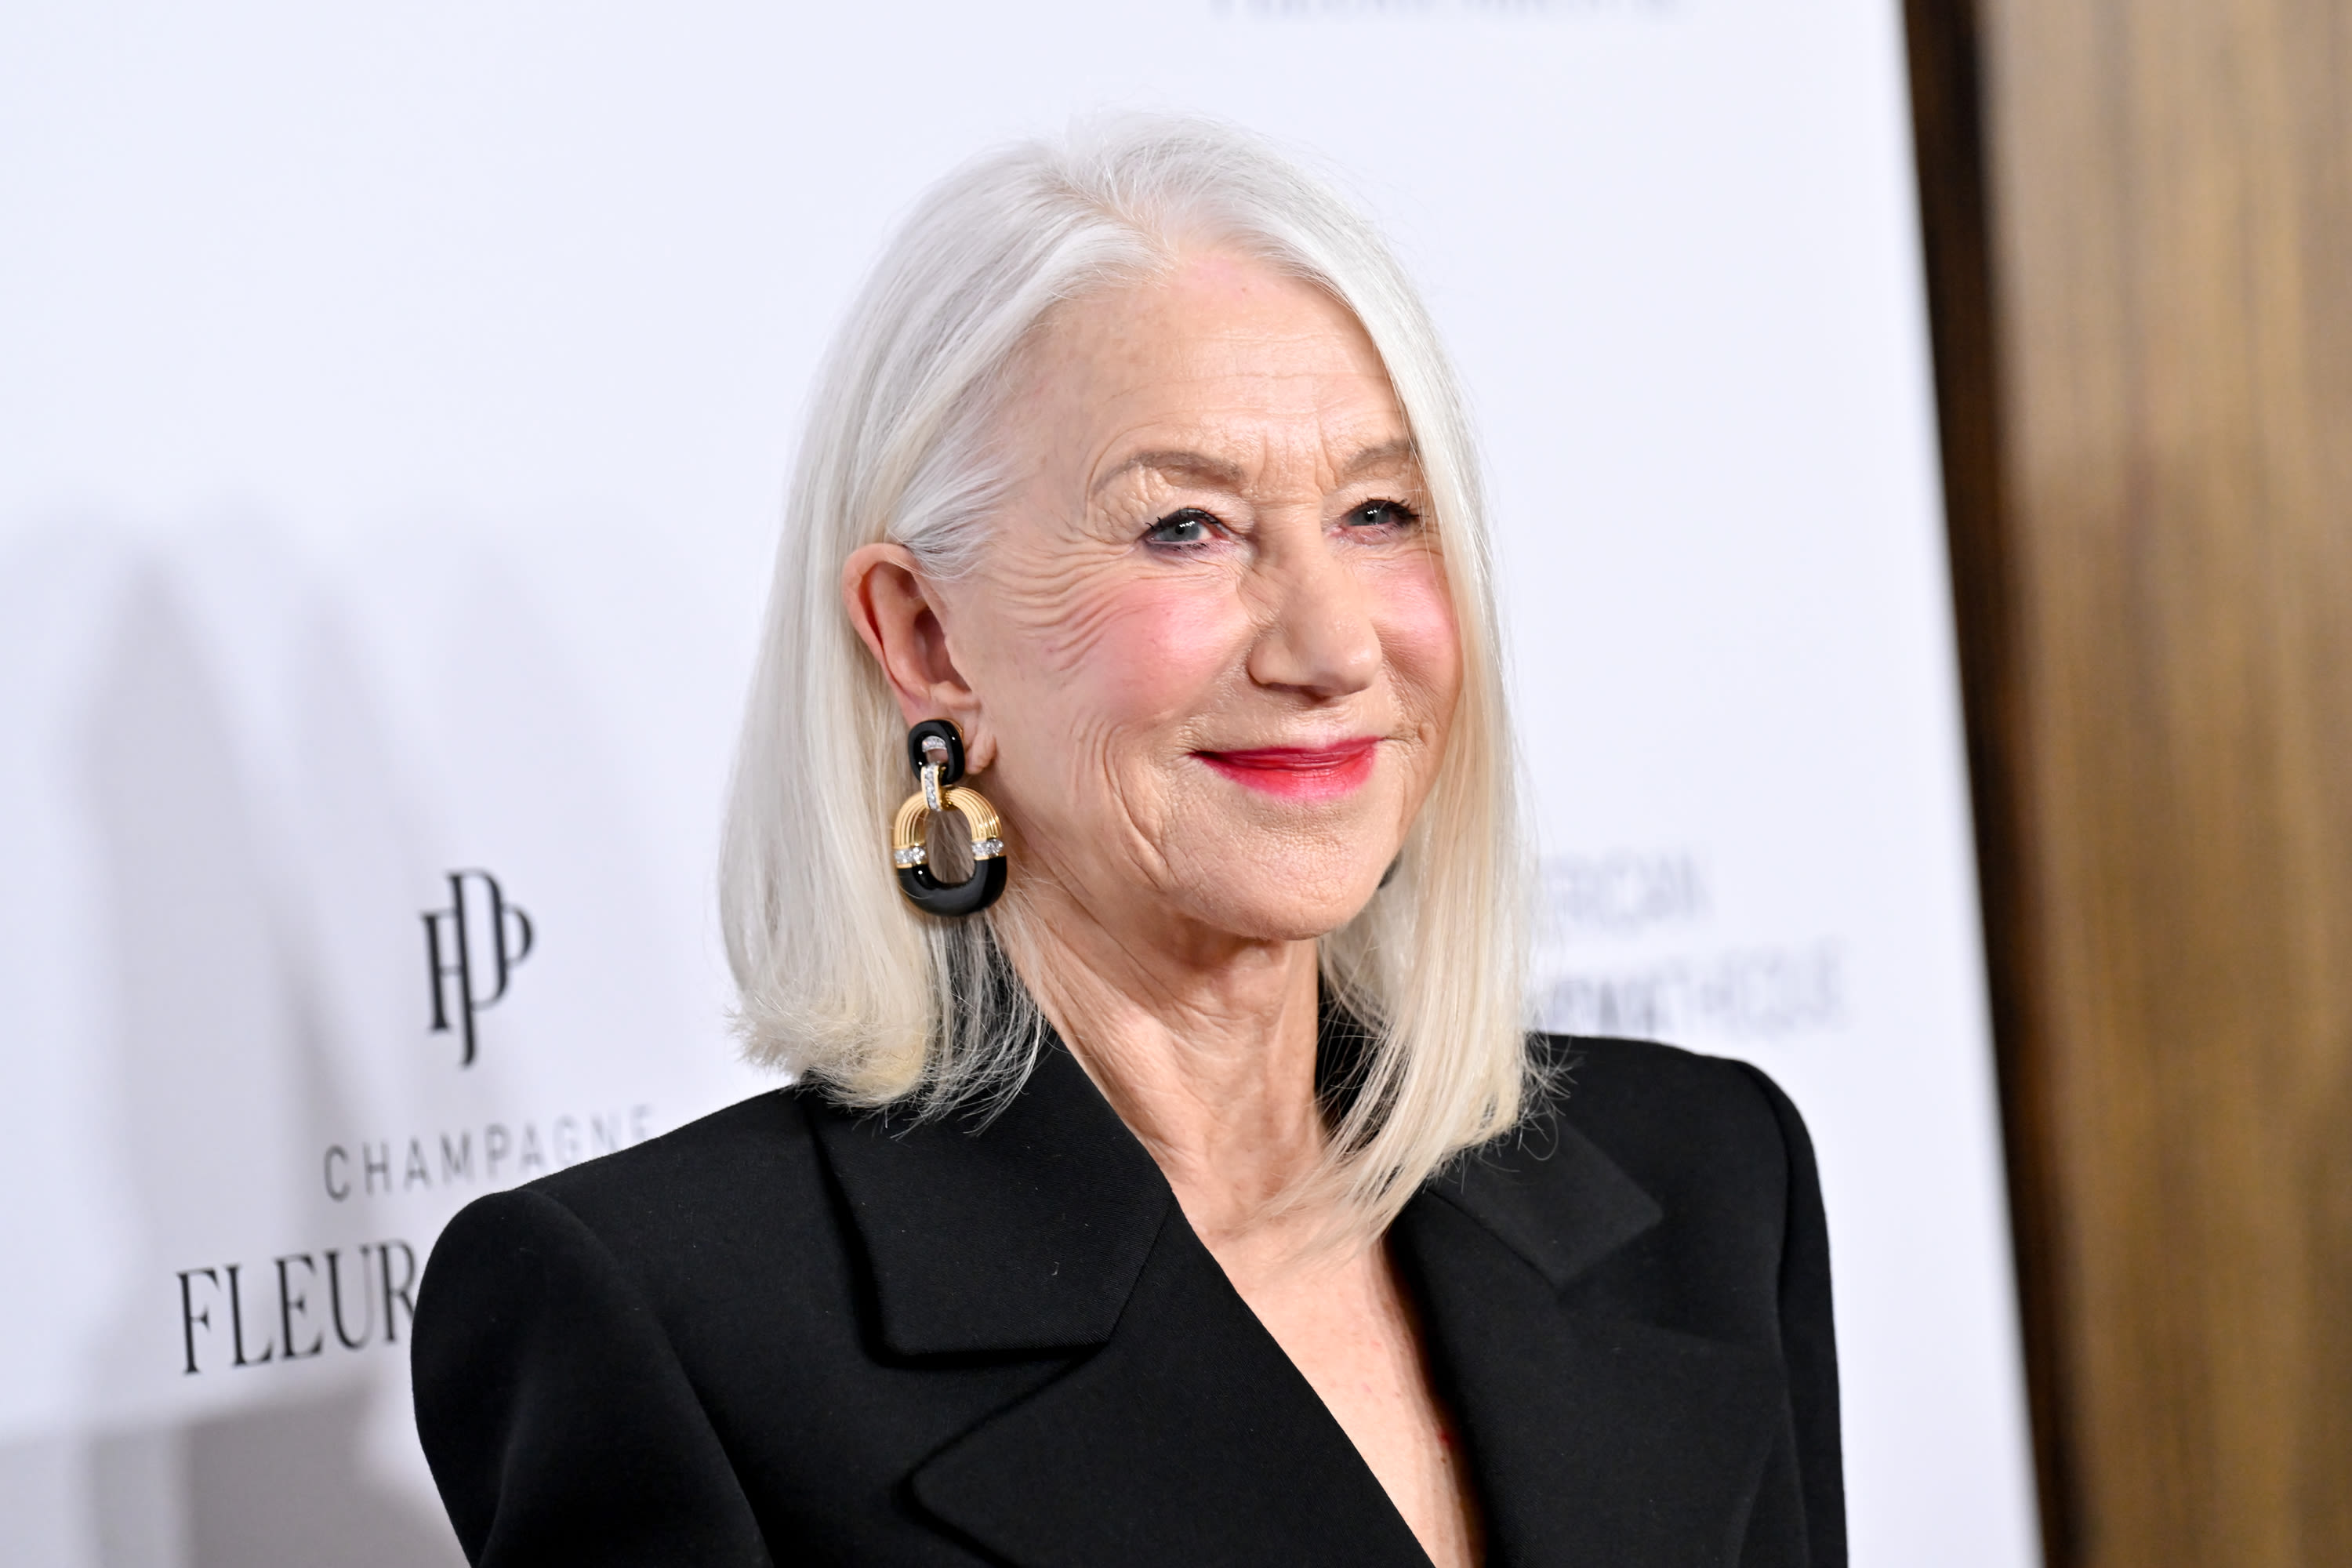 Helen Mirren's go-to sneakers are comfy 'right out of the box,' fans say